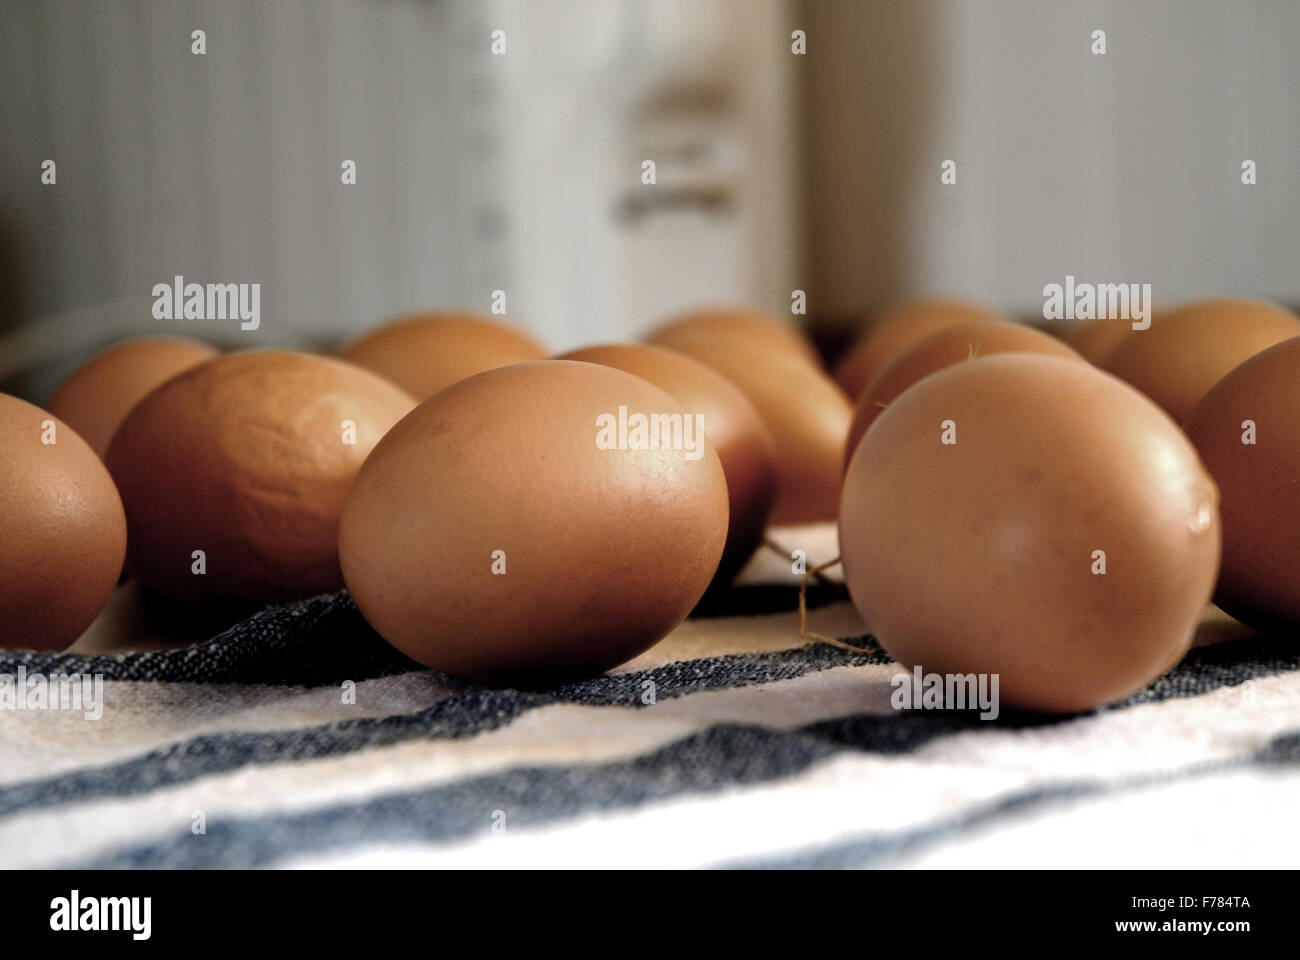 Fresh eggs on a blue and white striped tablecloth Stock Photo